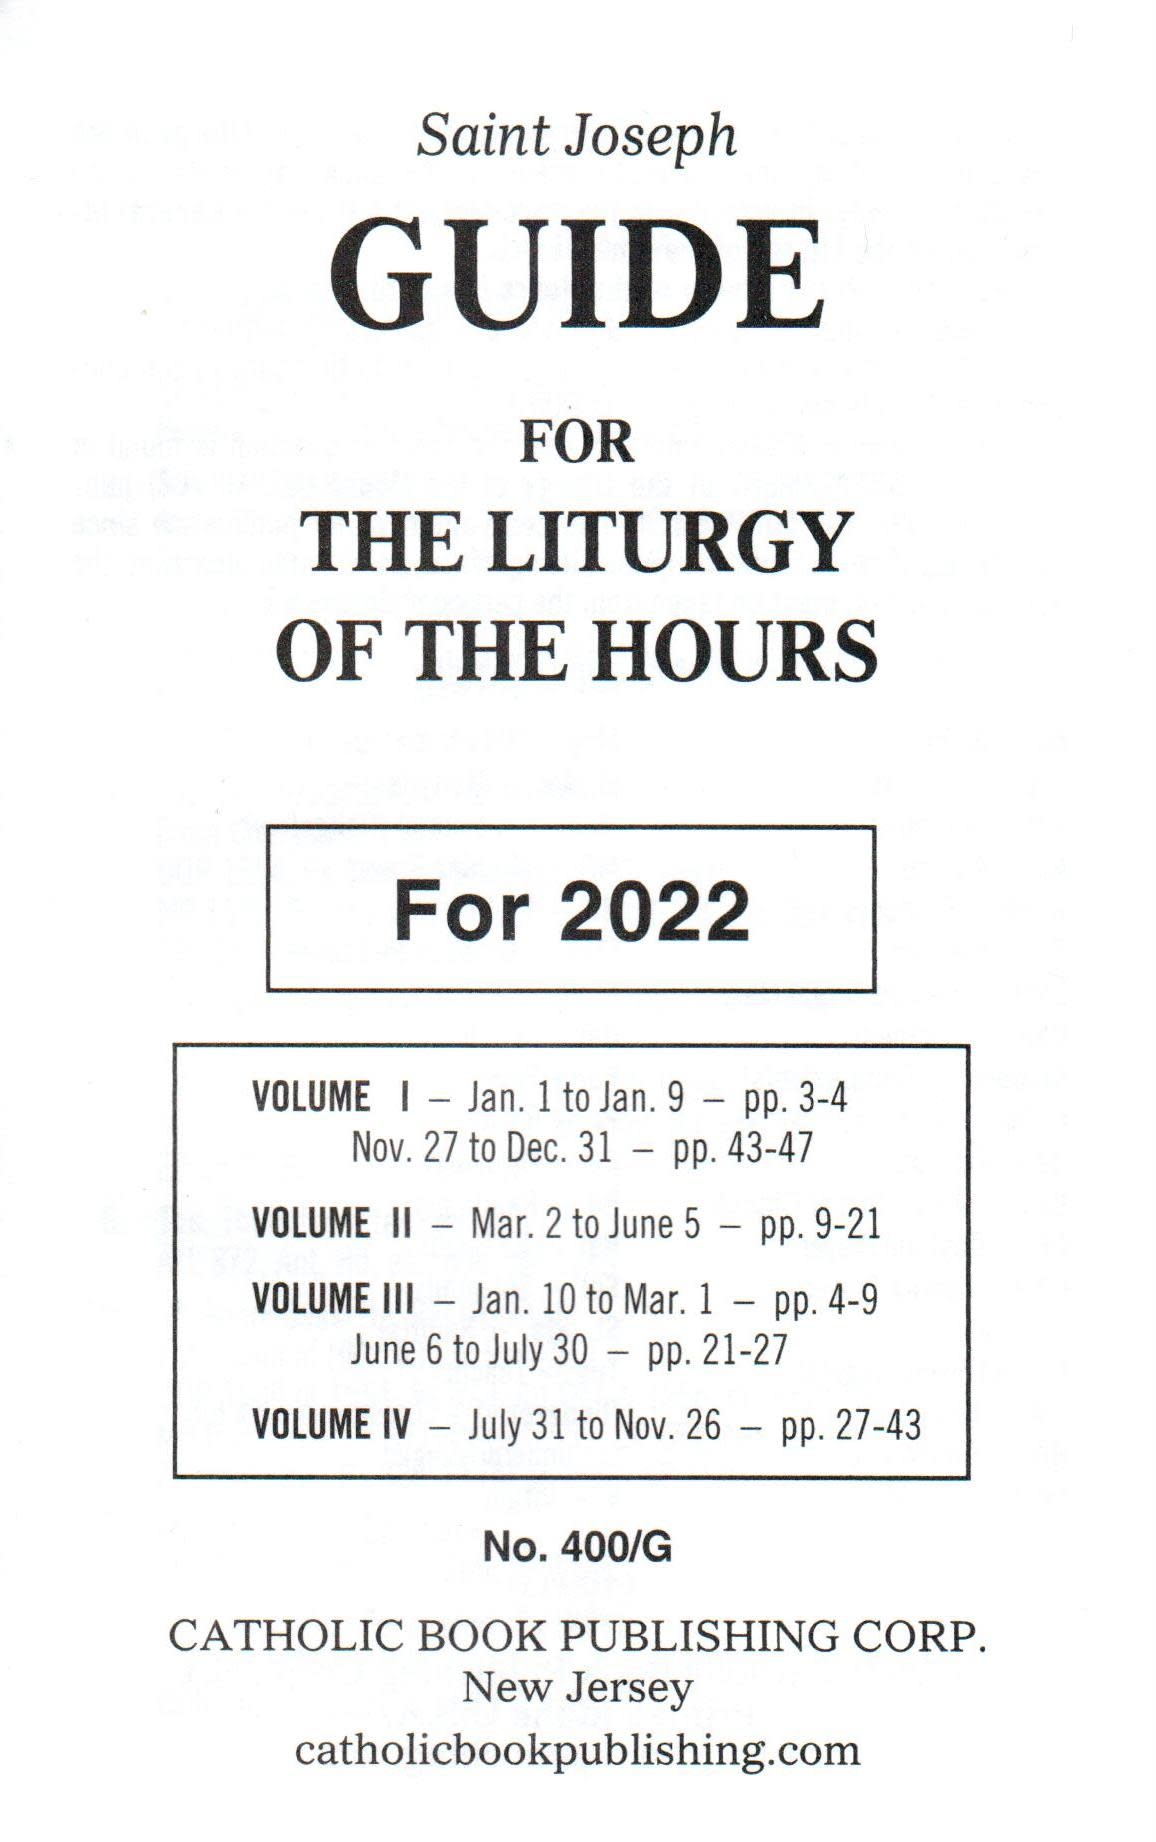 Saint Joseph Guide for The Liturgy of the Hours - 2022